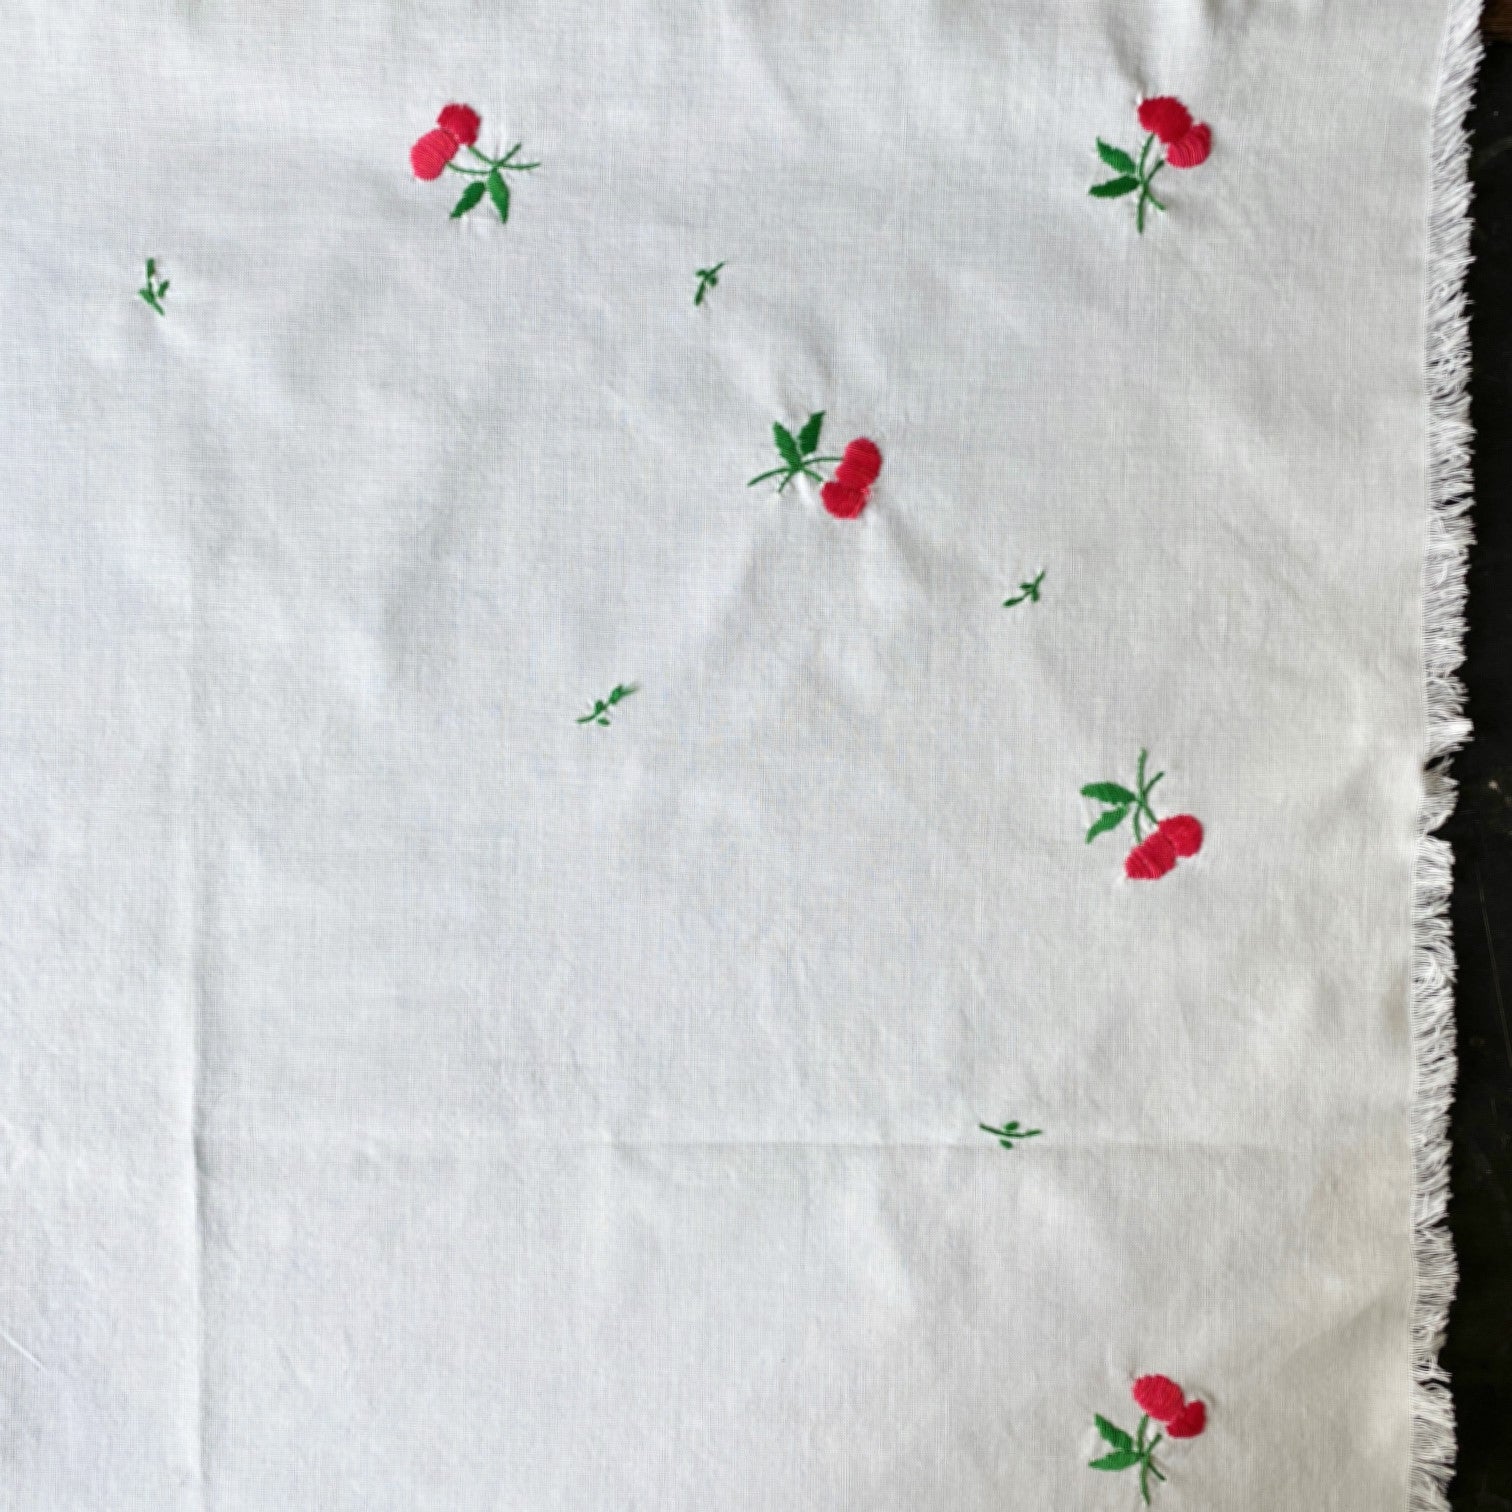 Vintage Embroidered Cherries Tablecloth 35x36